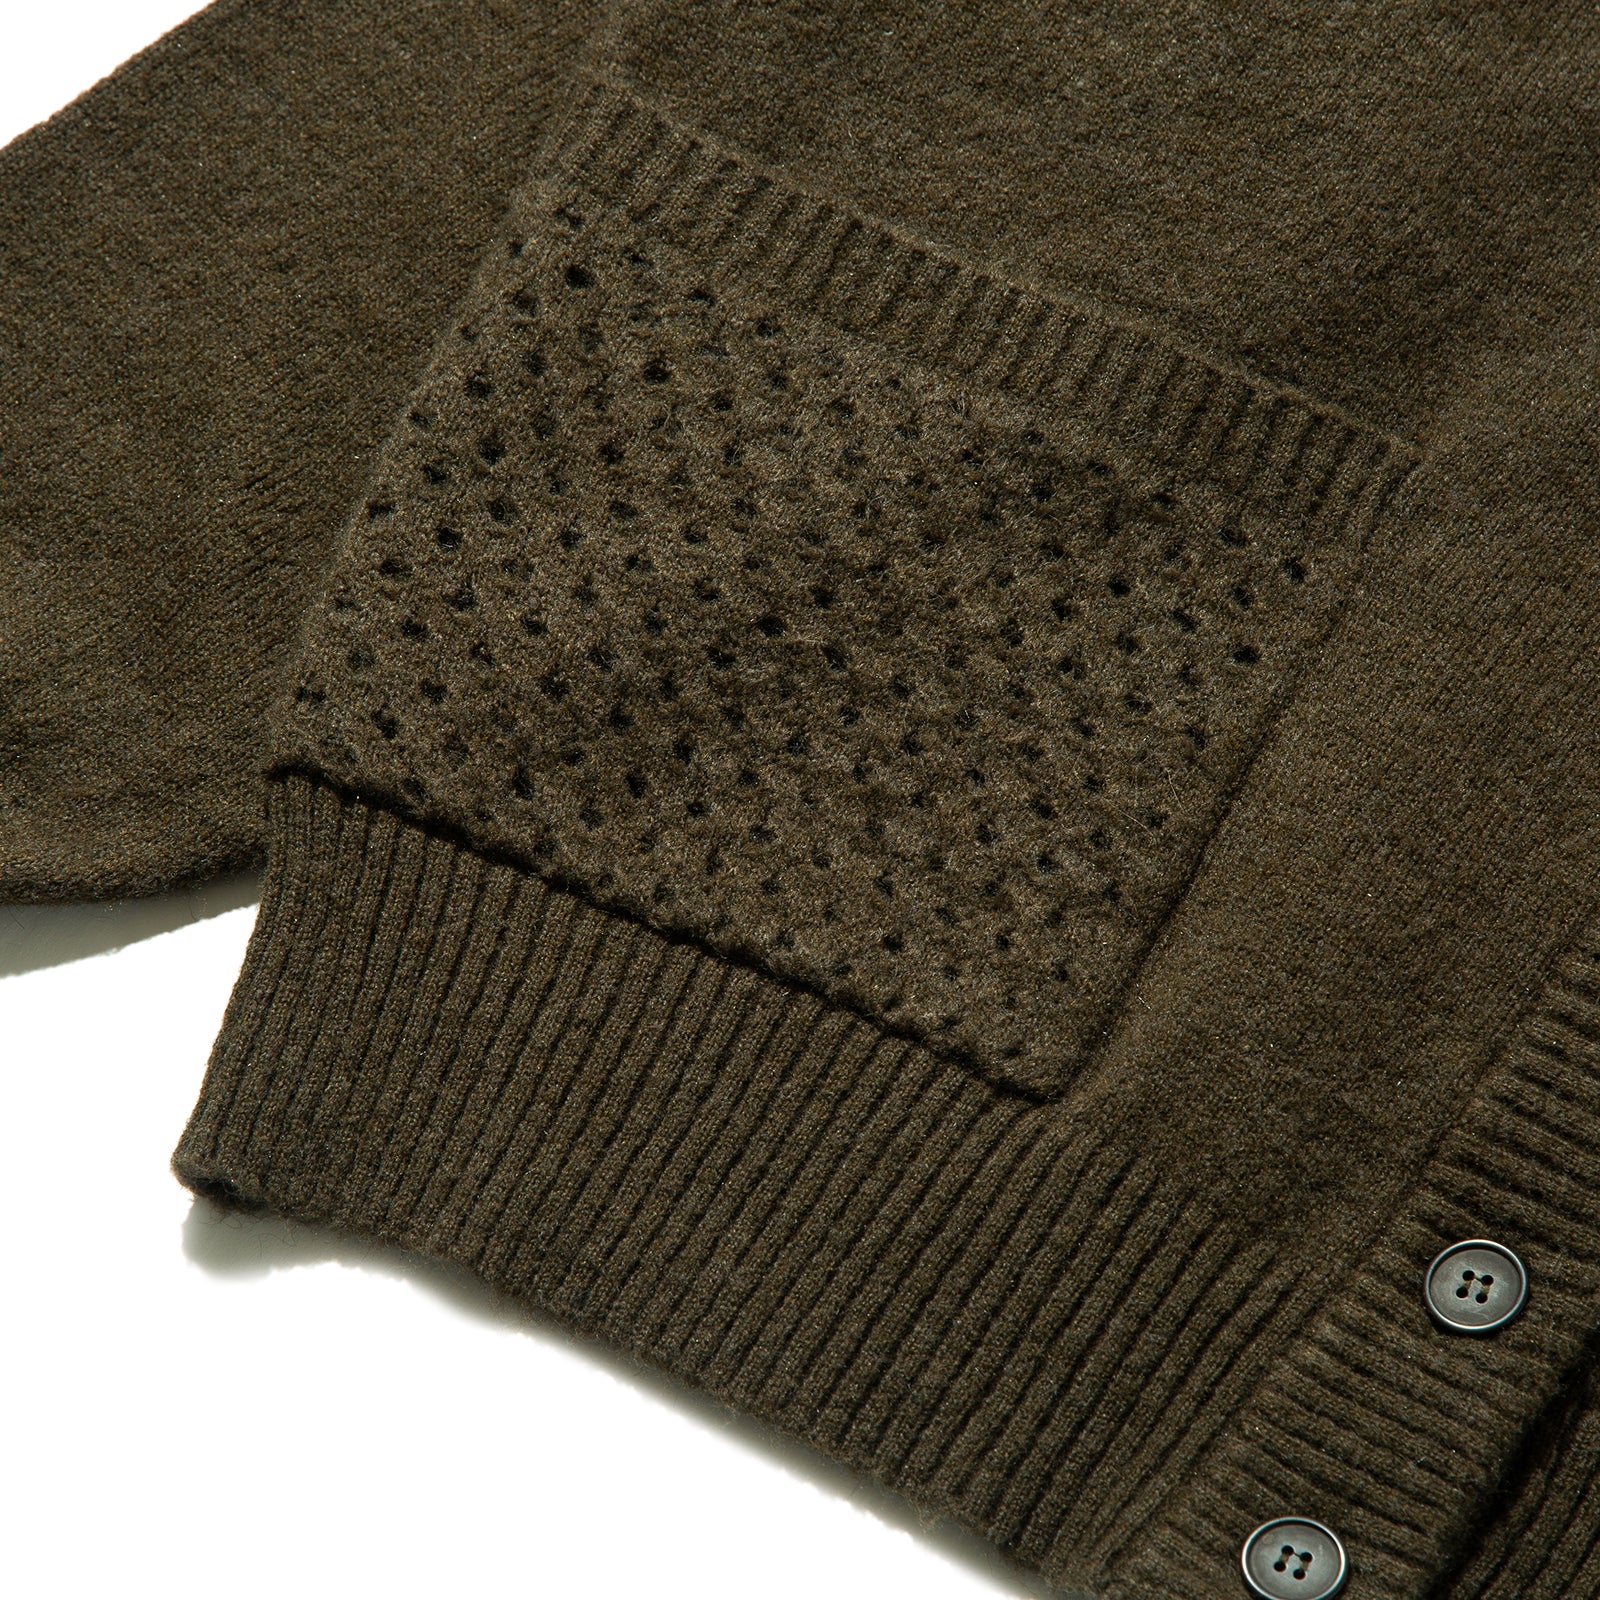 VENT PANEL KNIT CARDIGAN (Coyote)